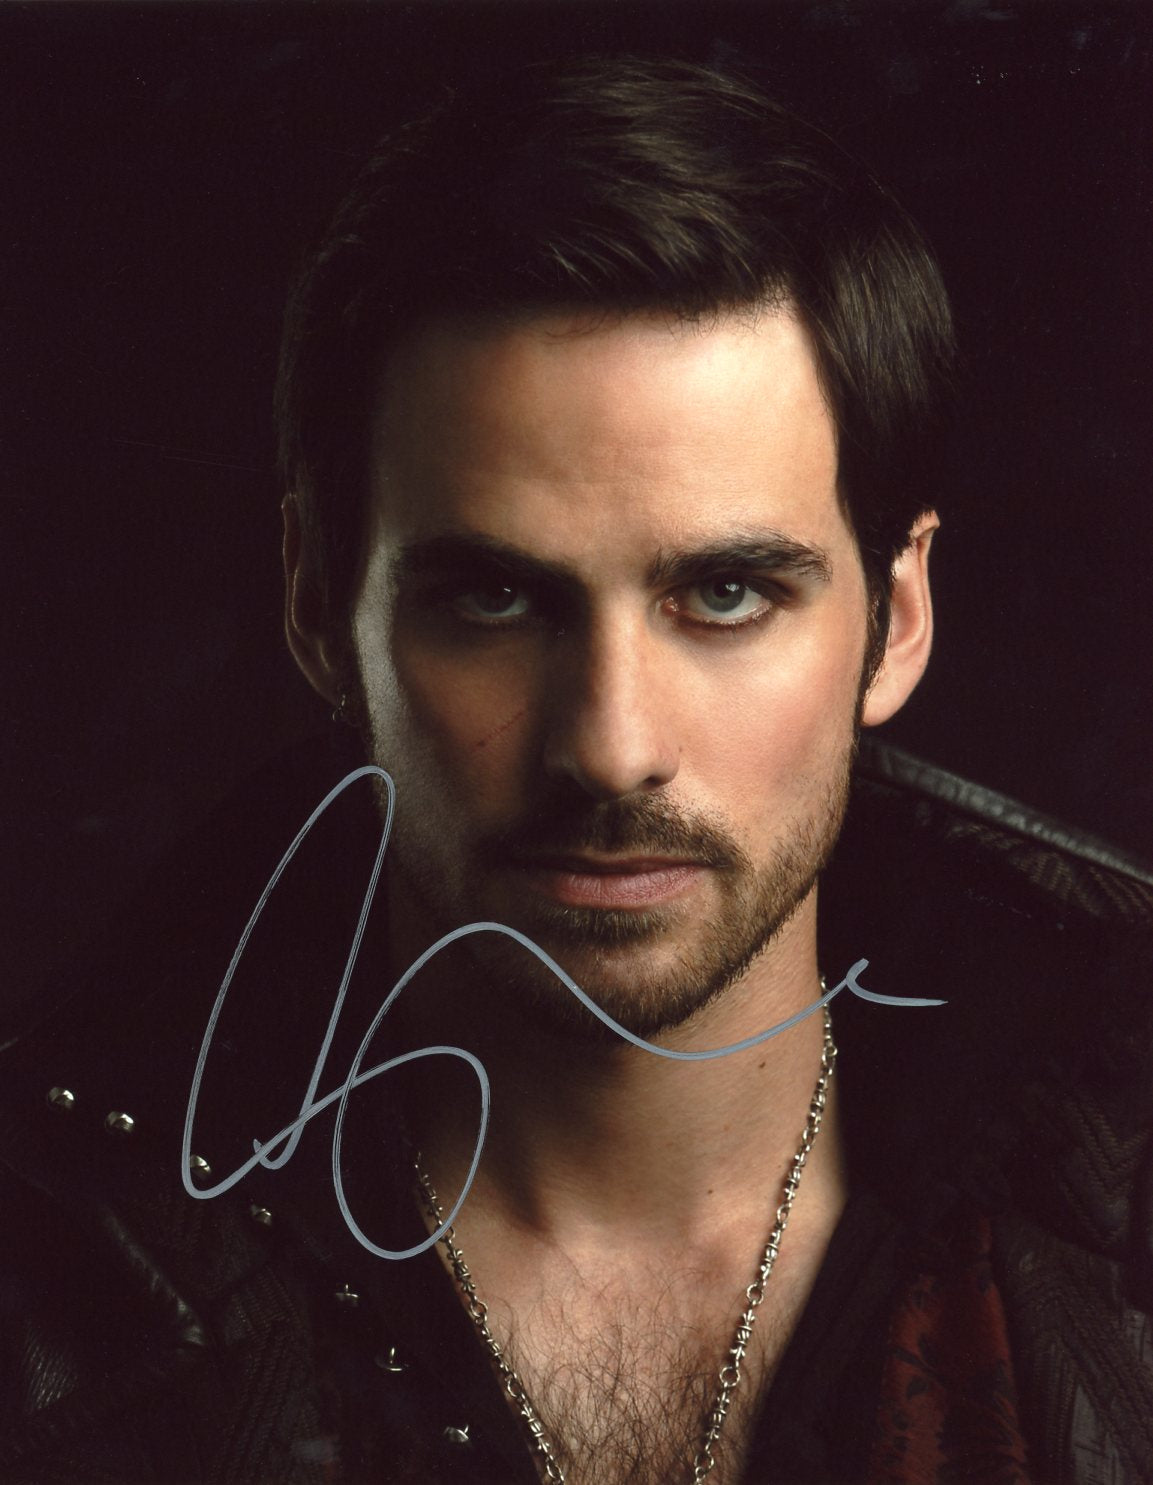 Colin O'Donoghue Once Upon A Time 8x10 Signed Photo JSA COA Certified Autograph GalaxyCon